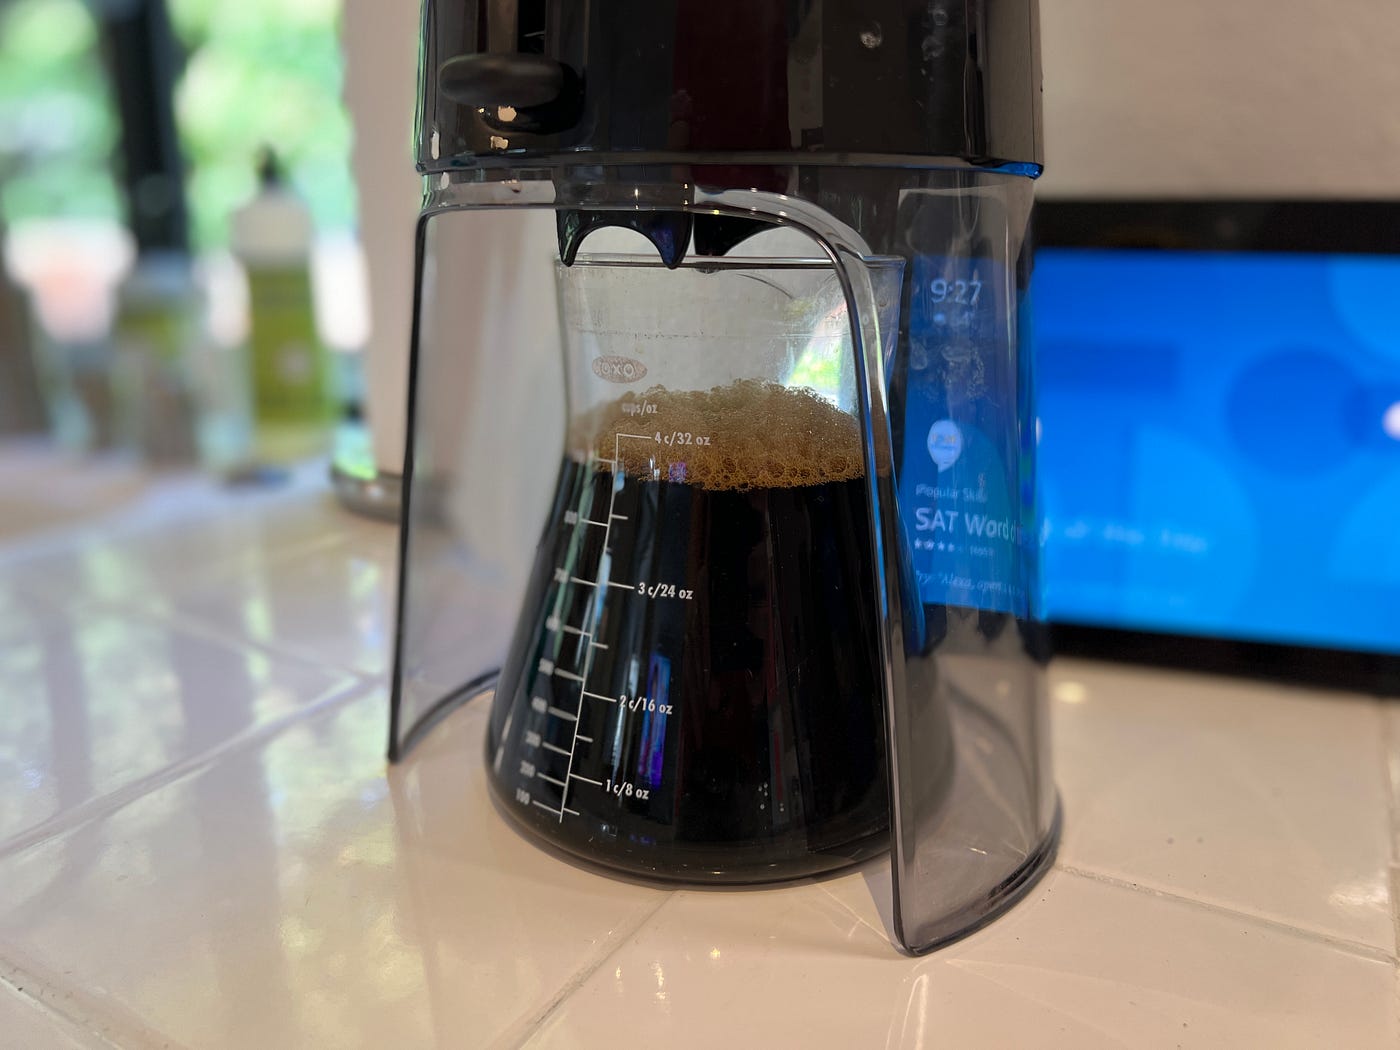 The Best Cold Brew Coffee Maker — Review After 11 Months of Daily